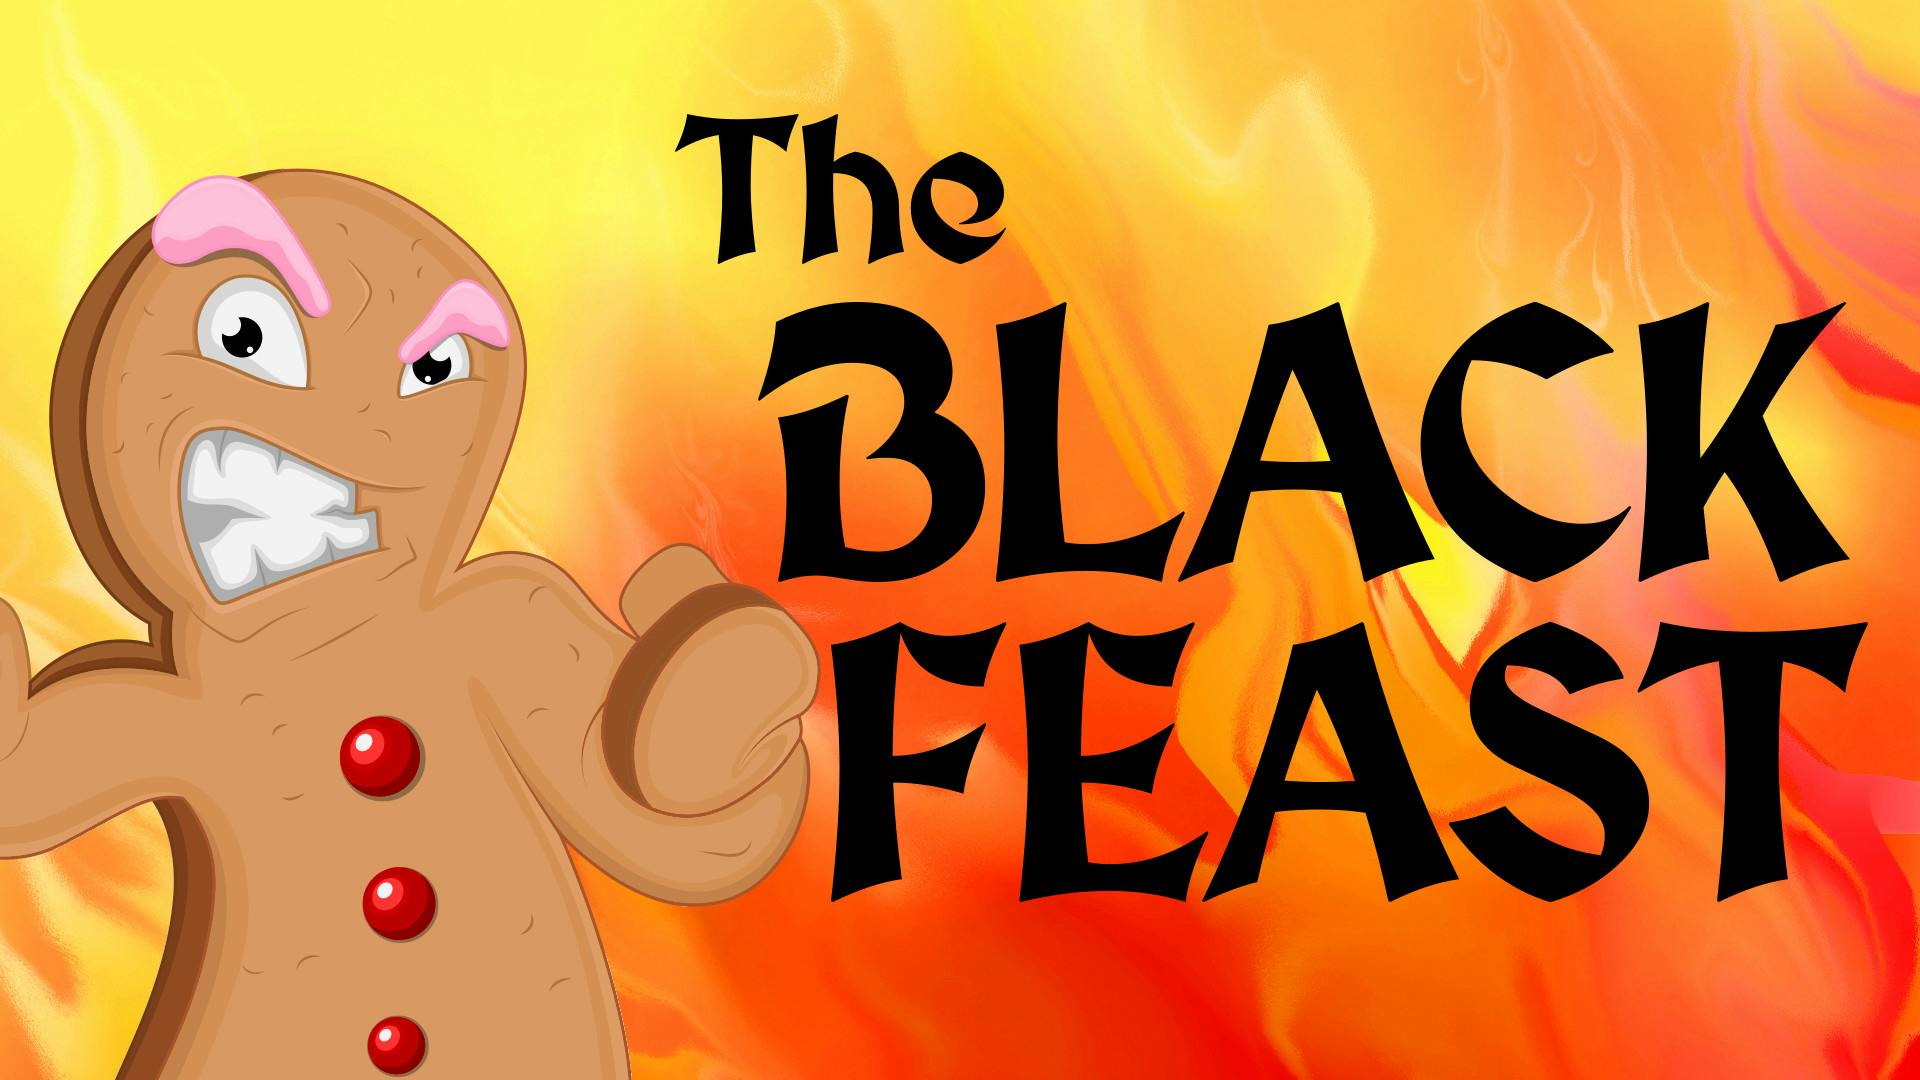 The Black Feast | A Whole New Kind of Food Fight